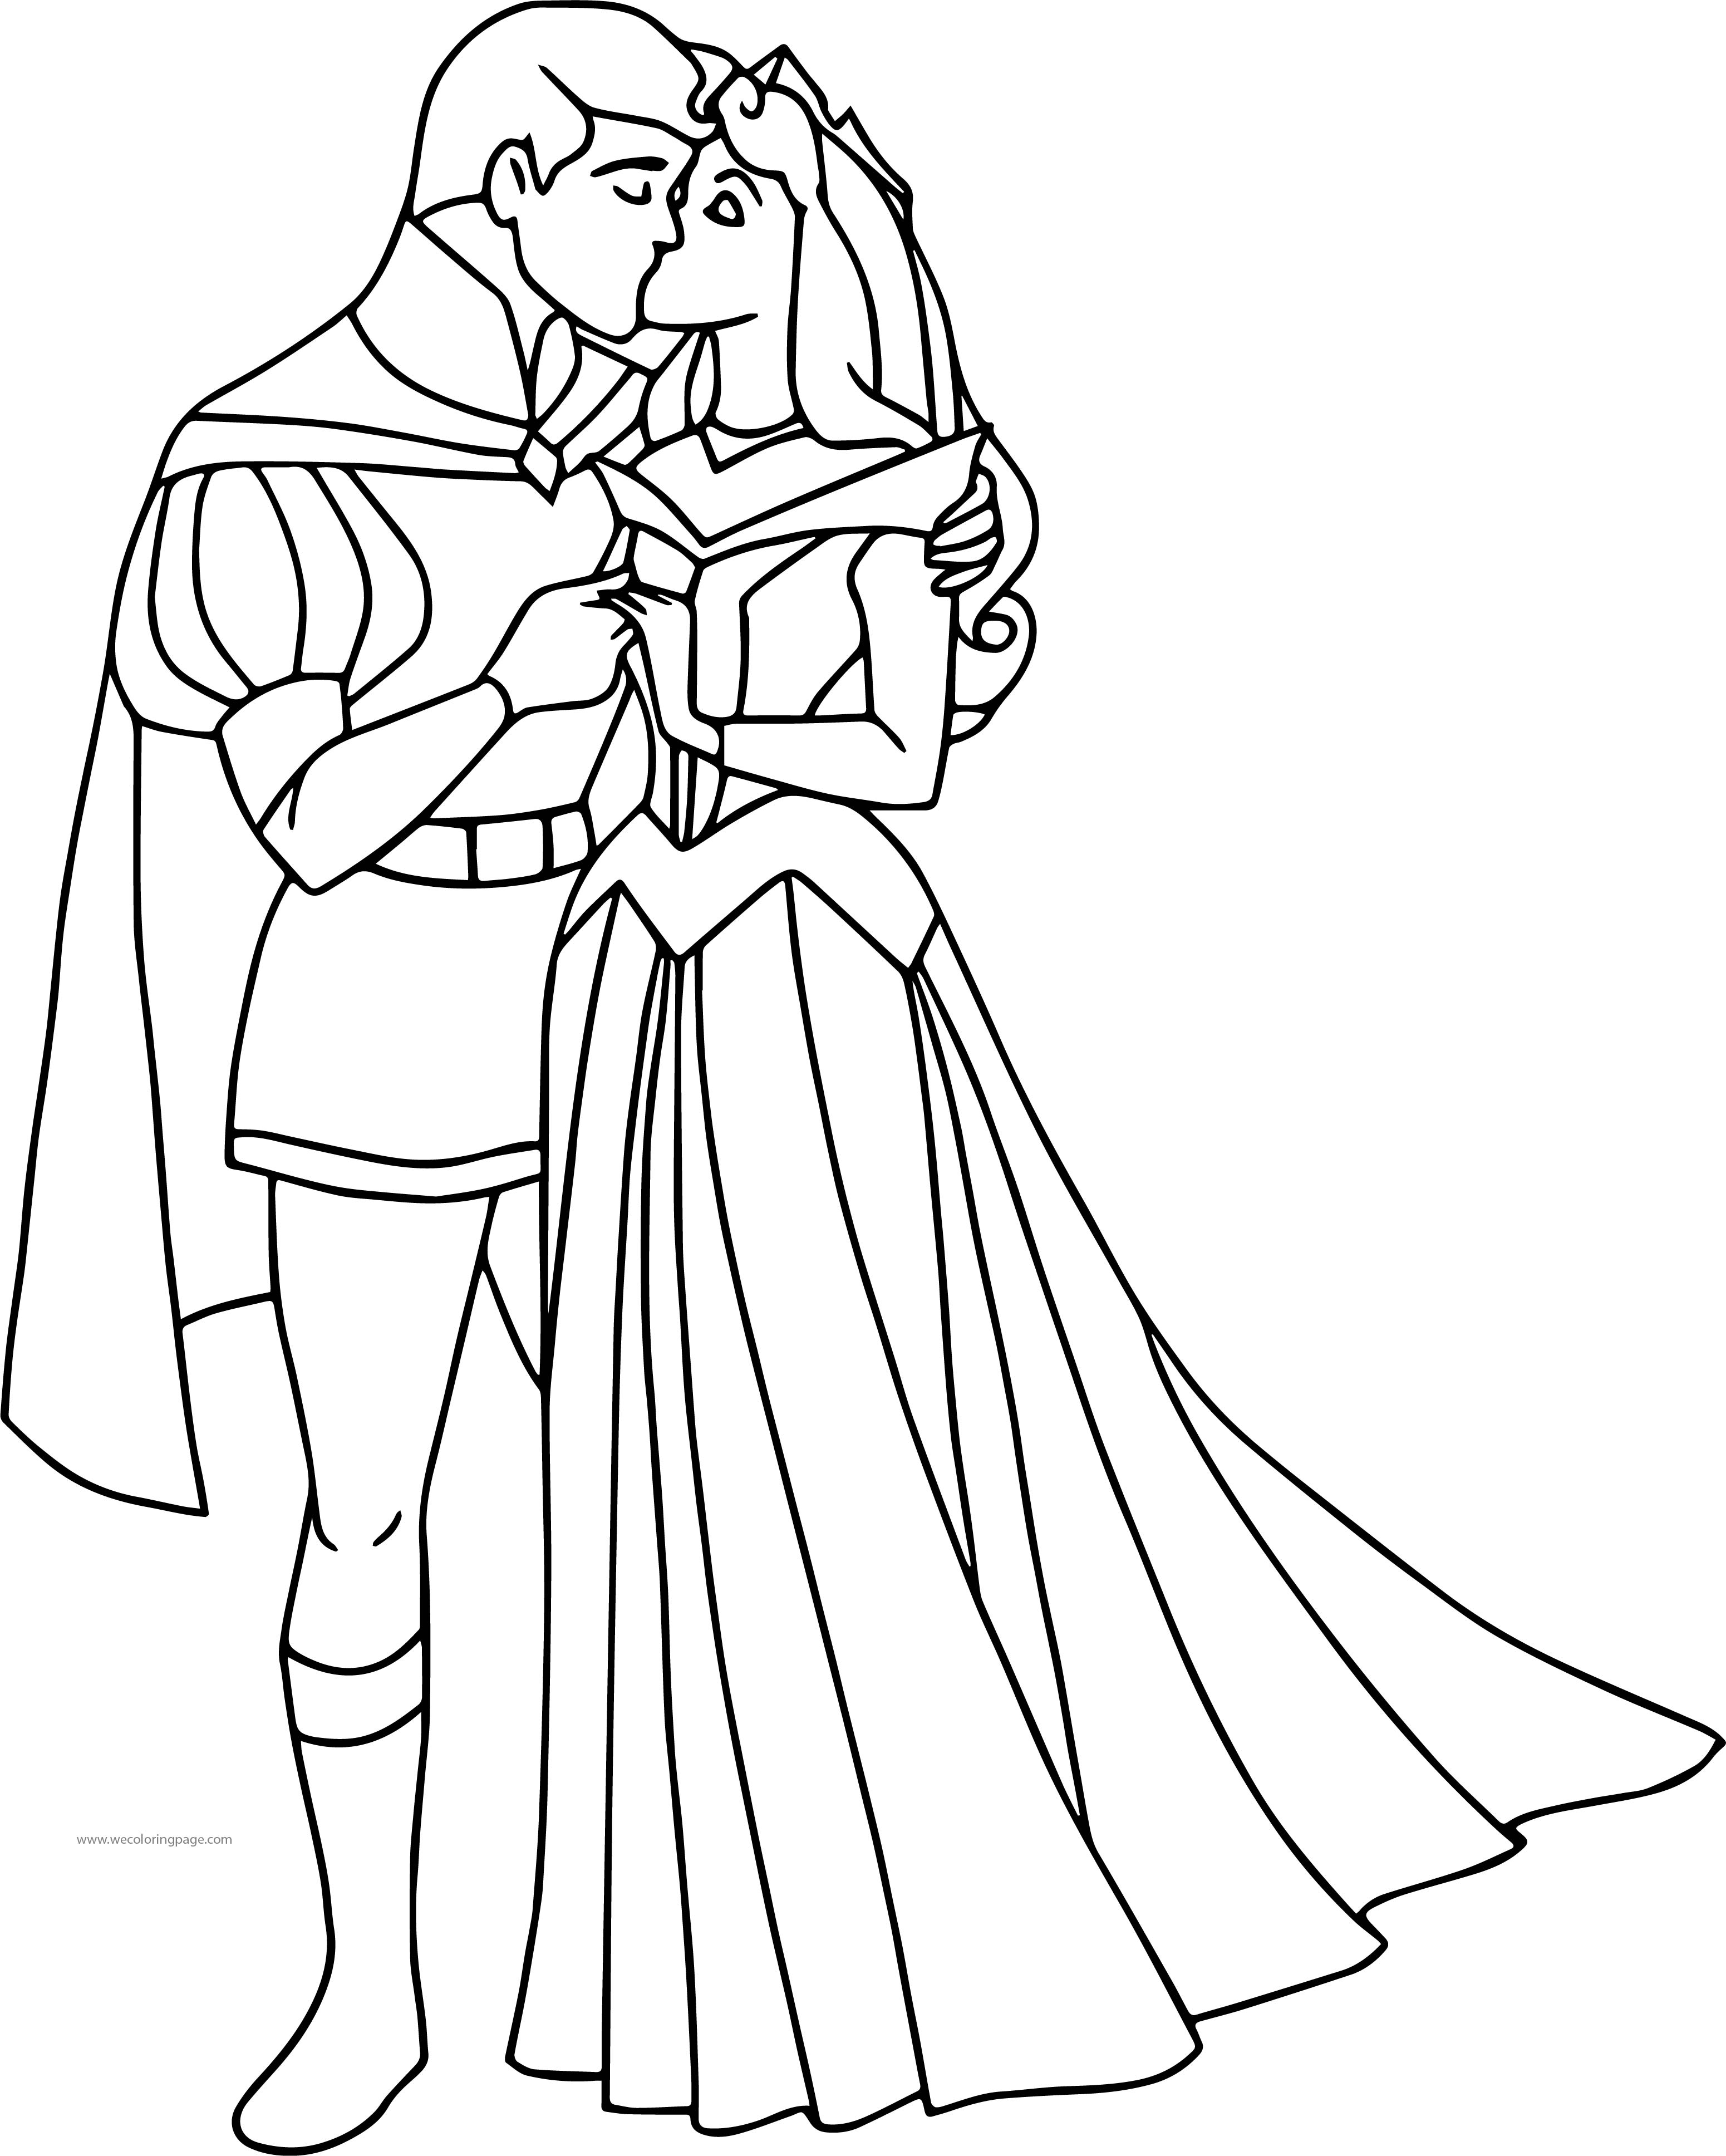 Sleeping Beauty And Prince Philip Coloring Pages